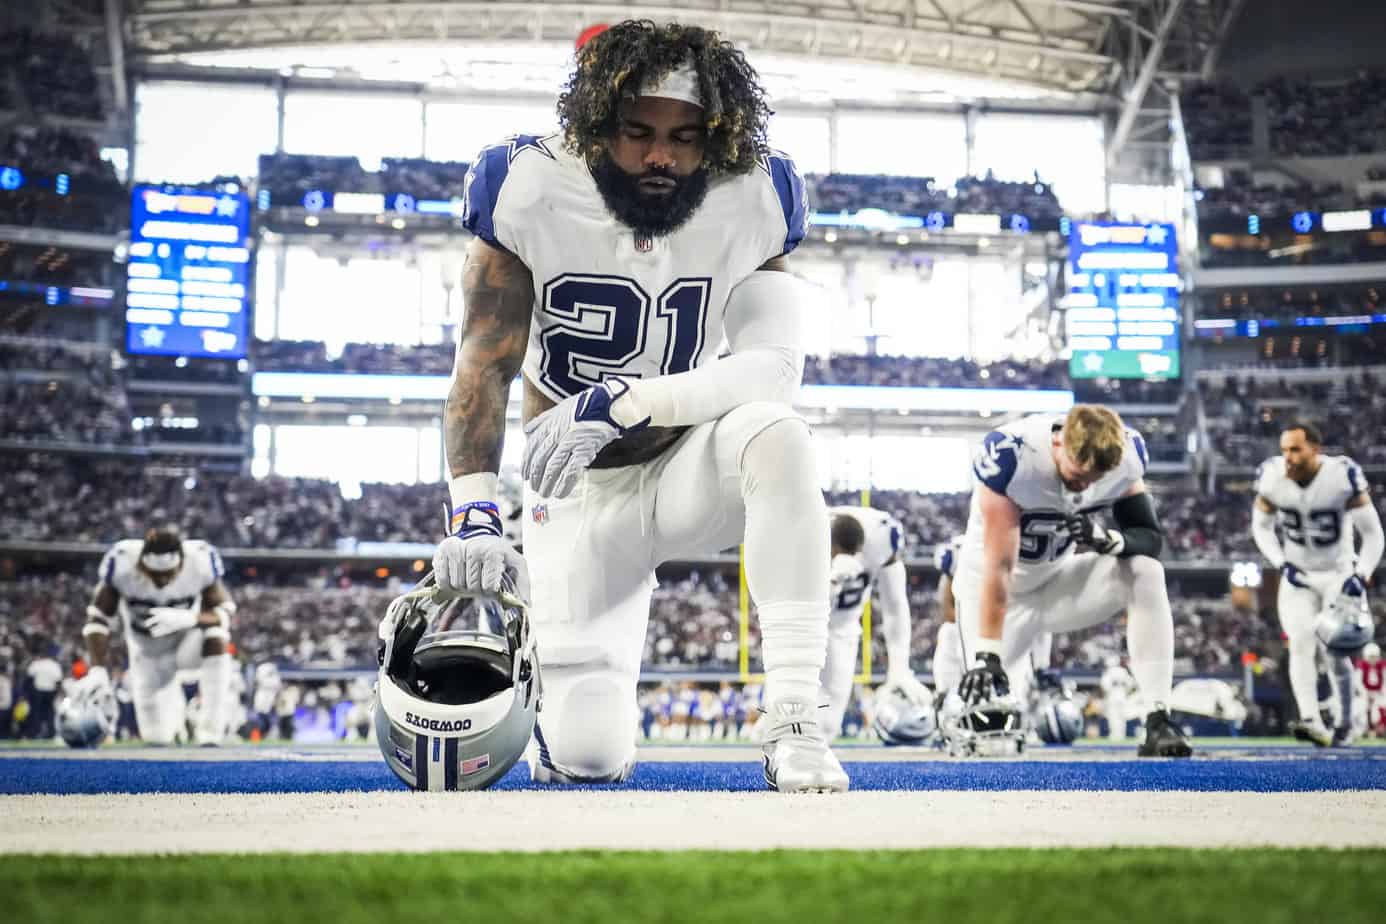 Dallas Cowboys running back Ezekiel Elliott kneels in the end zone before an NFL football game against the Arizona Cardinals at AT&T Stadium on Sunday, Jan. 2, 2022, in Arlington.